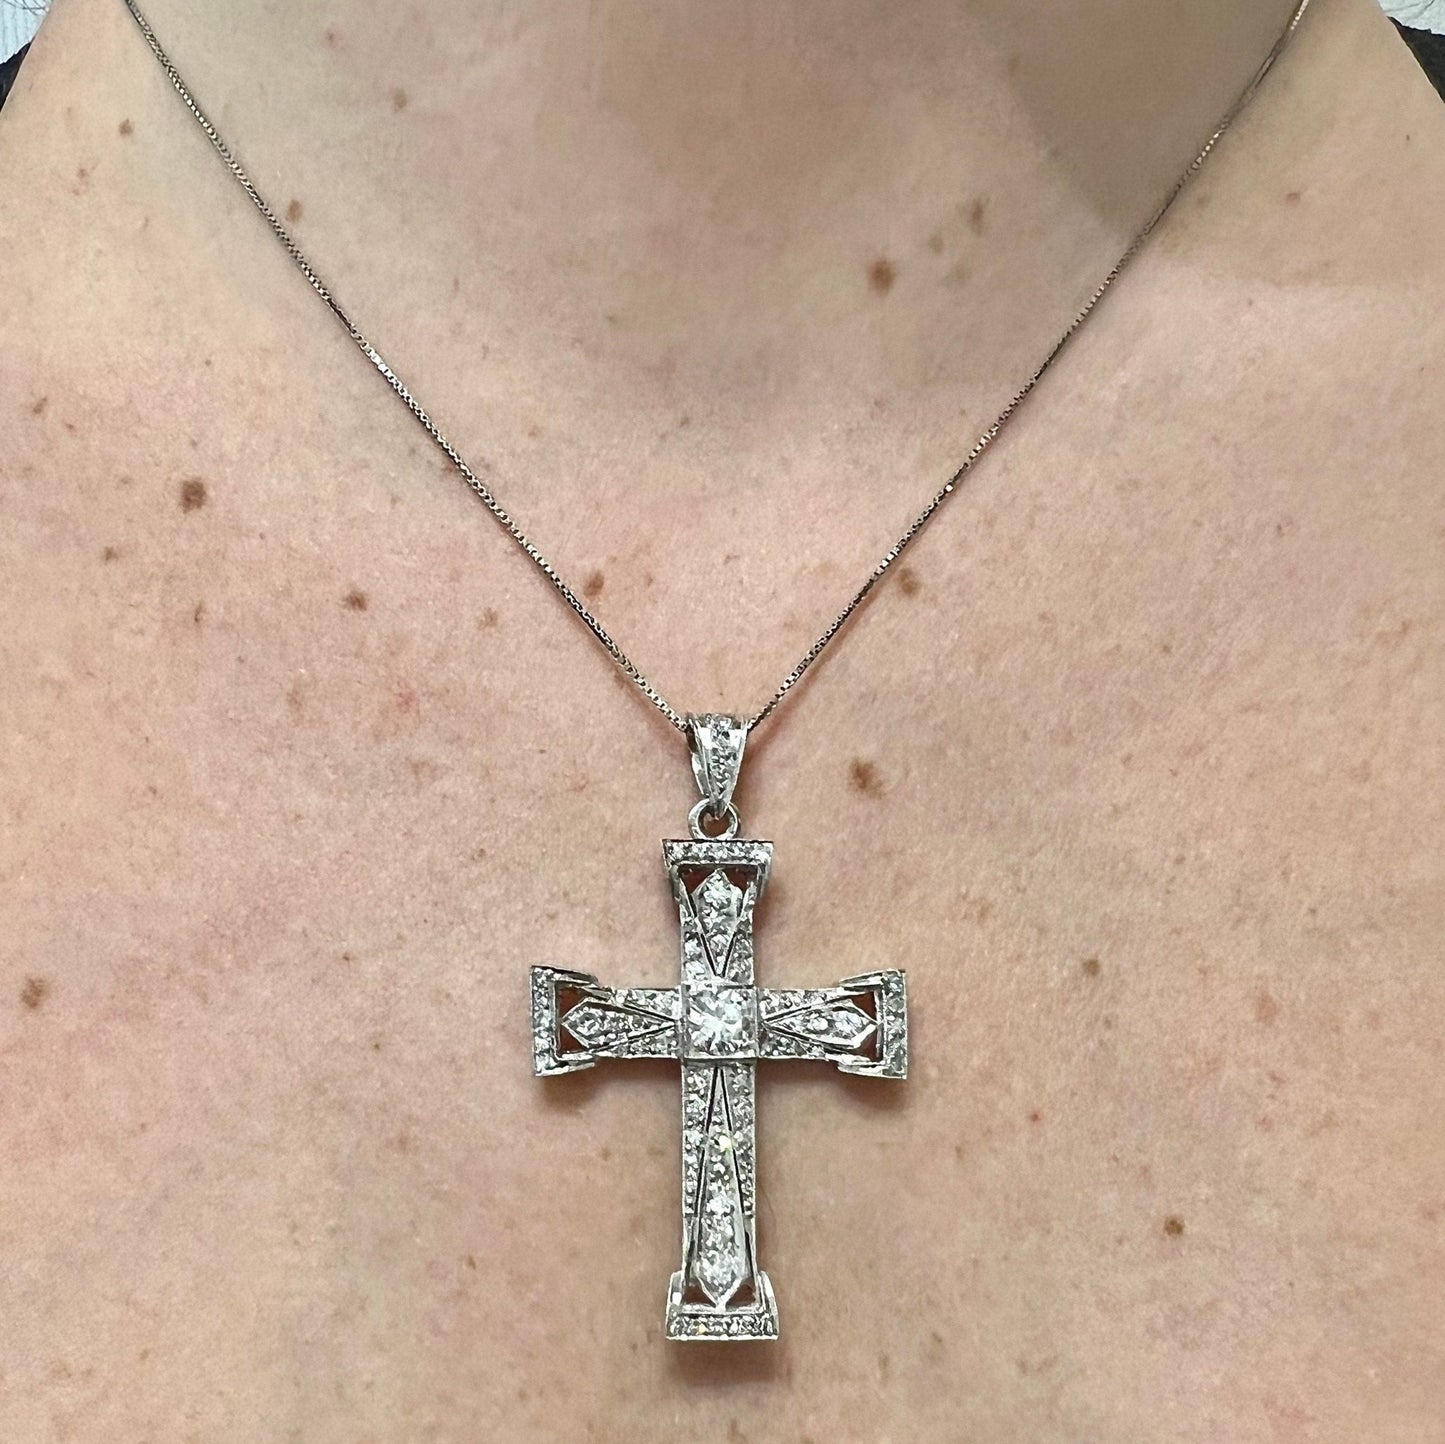 Rare Vintage 18K Diamond Cross Pendant Necklace - White Gold Filigree Diamond Necklace - Religious Jewelry - Christmas Best Gift For Her